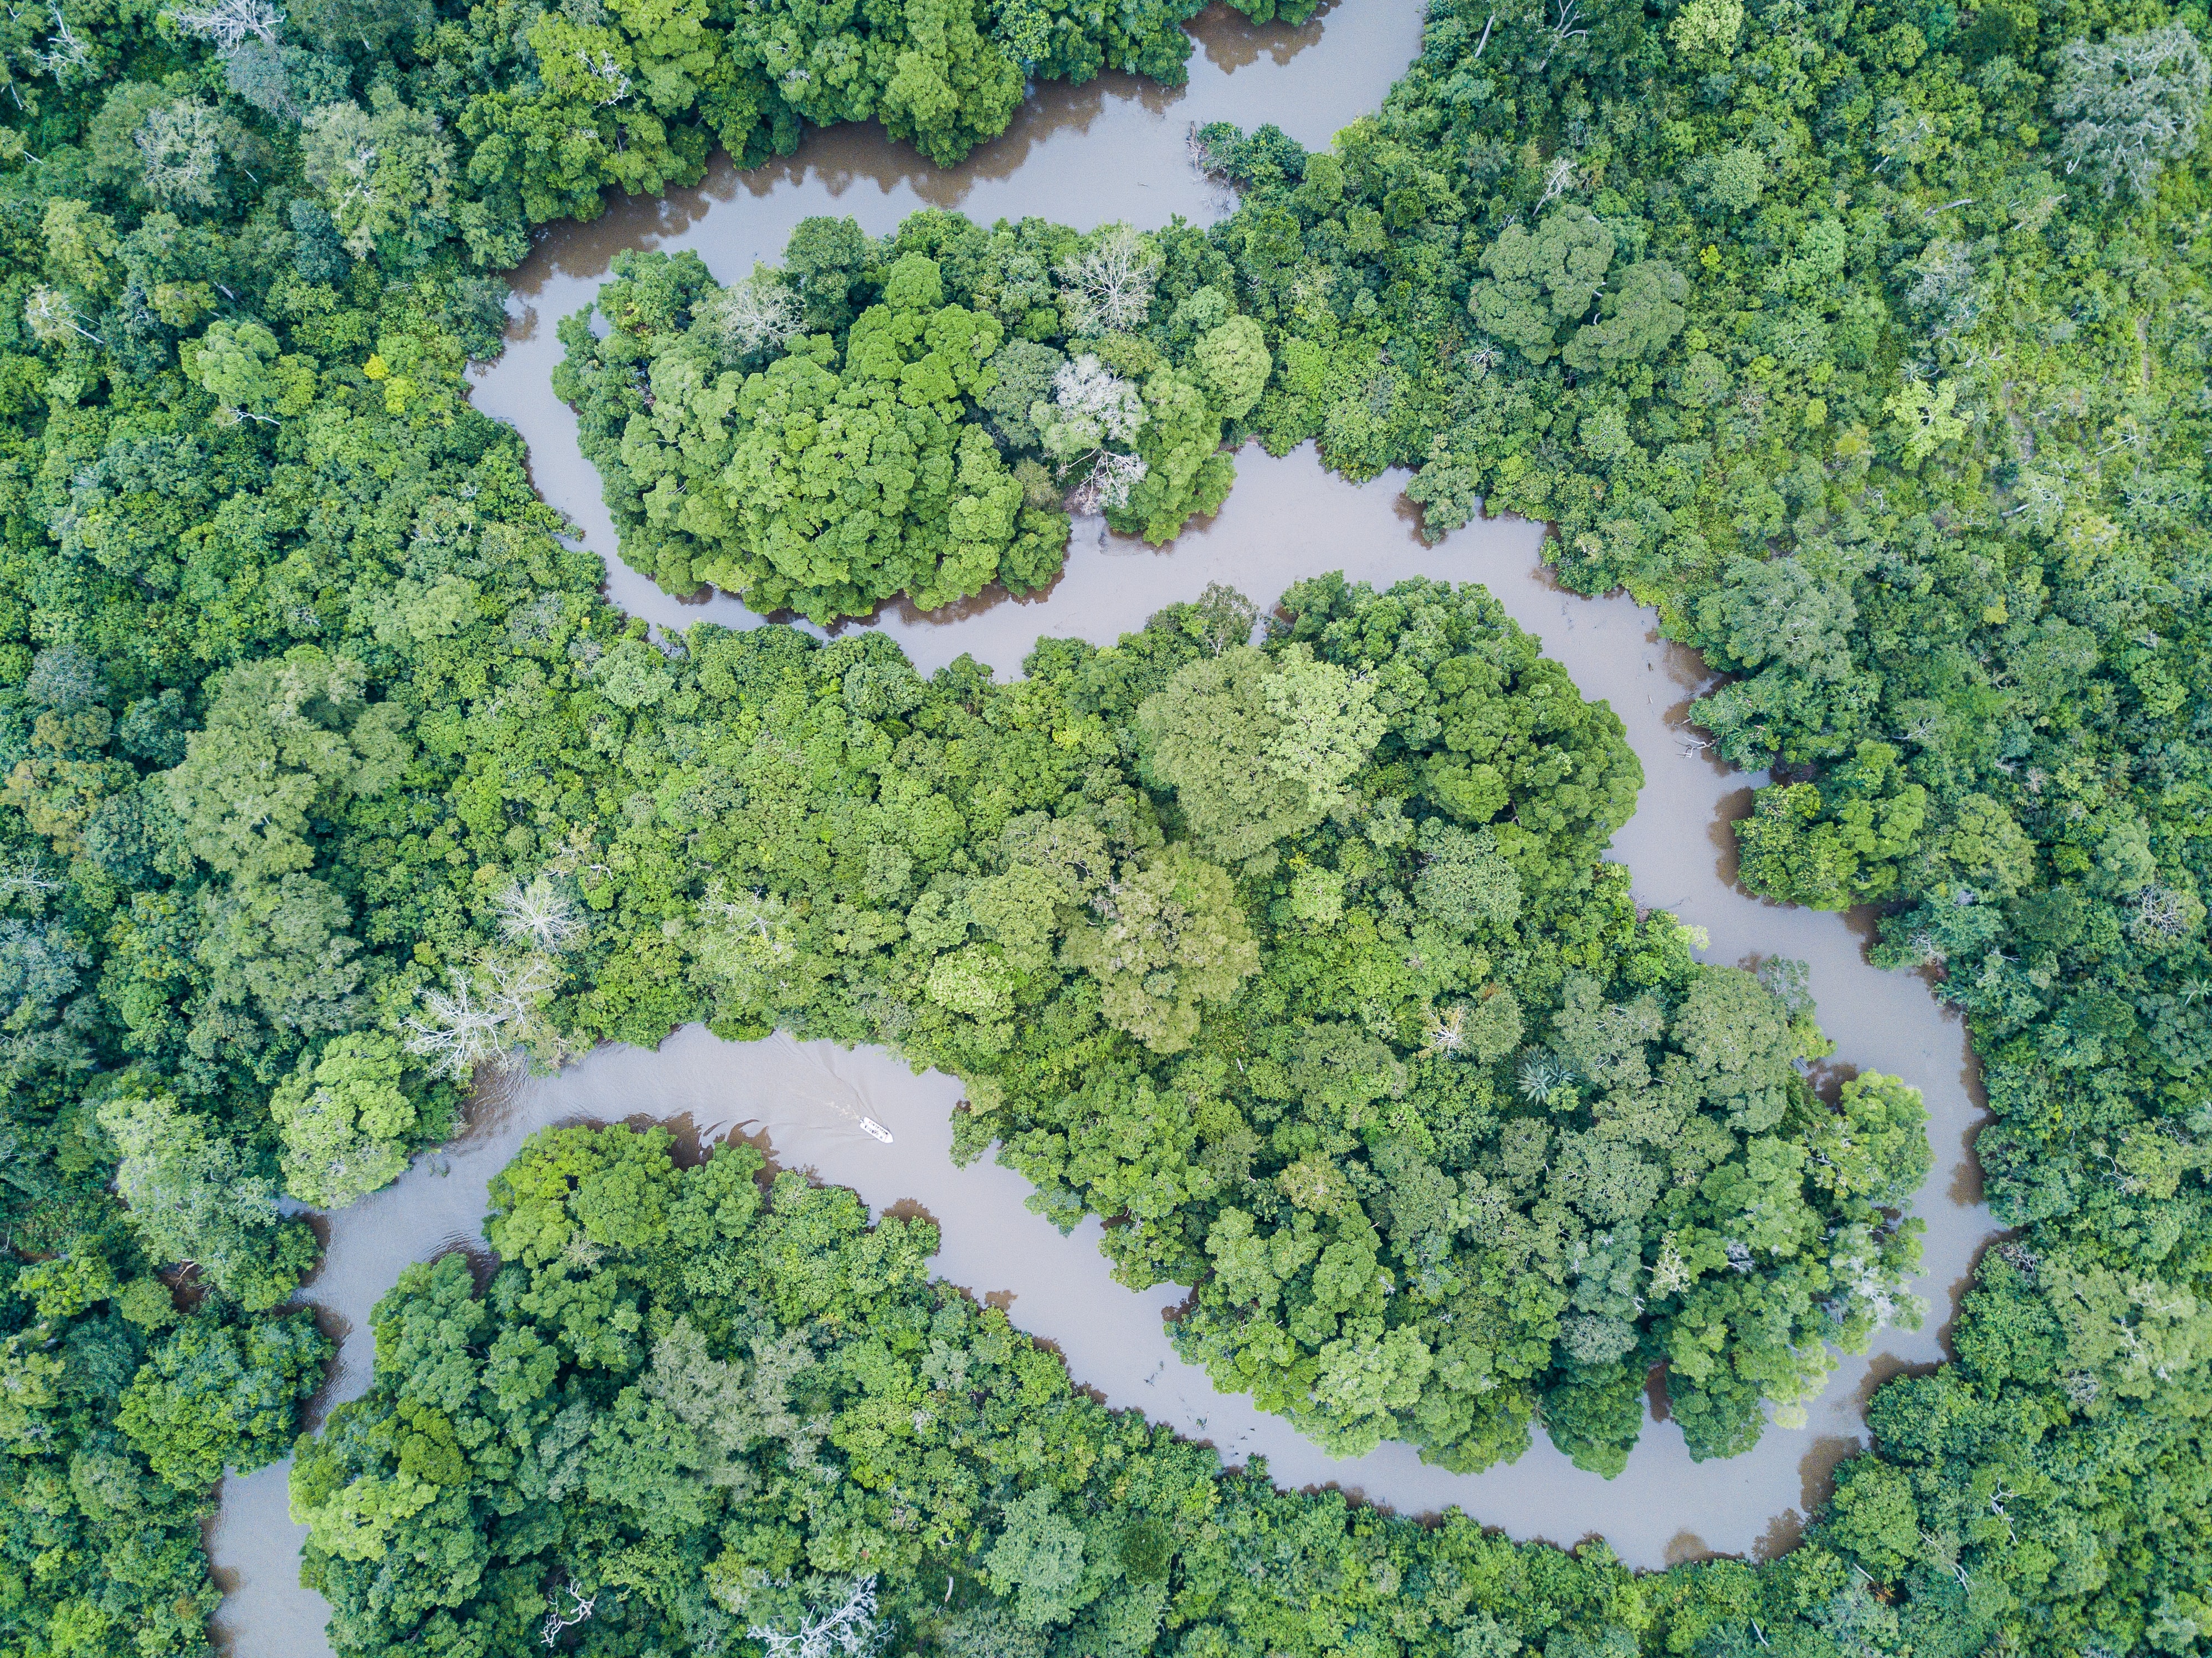 Aerial view of river meandering through dense forest.